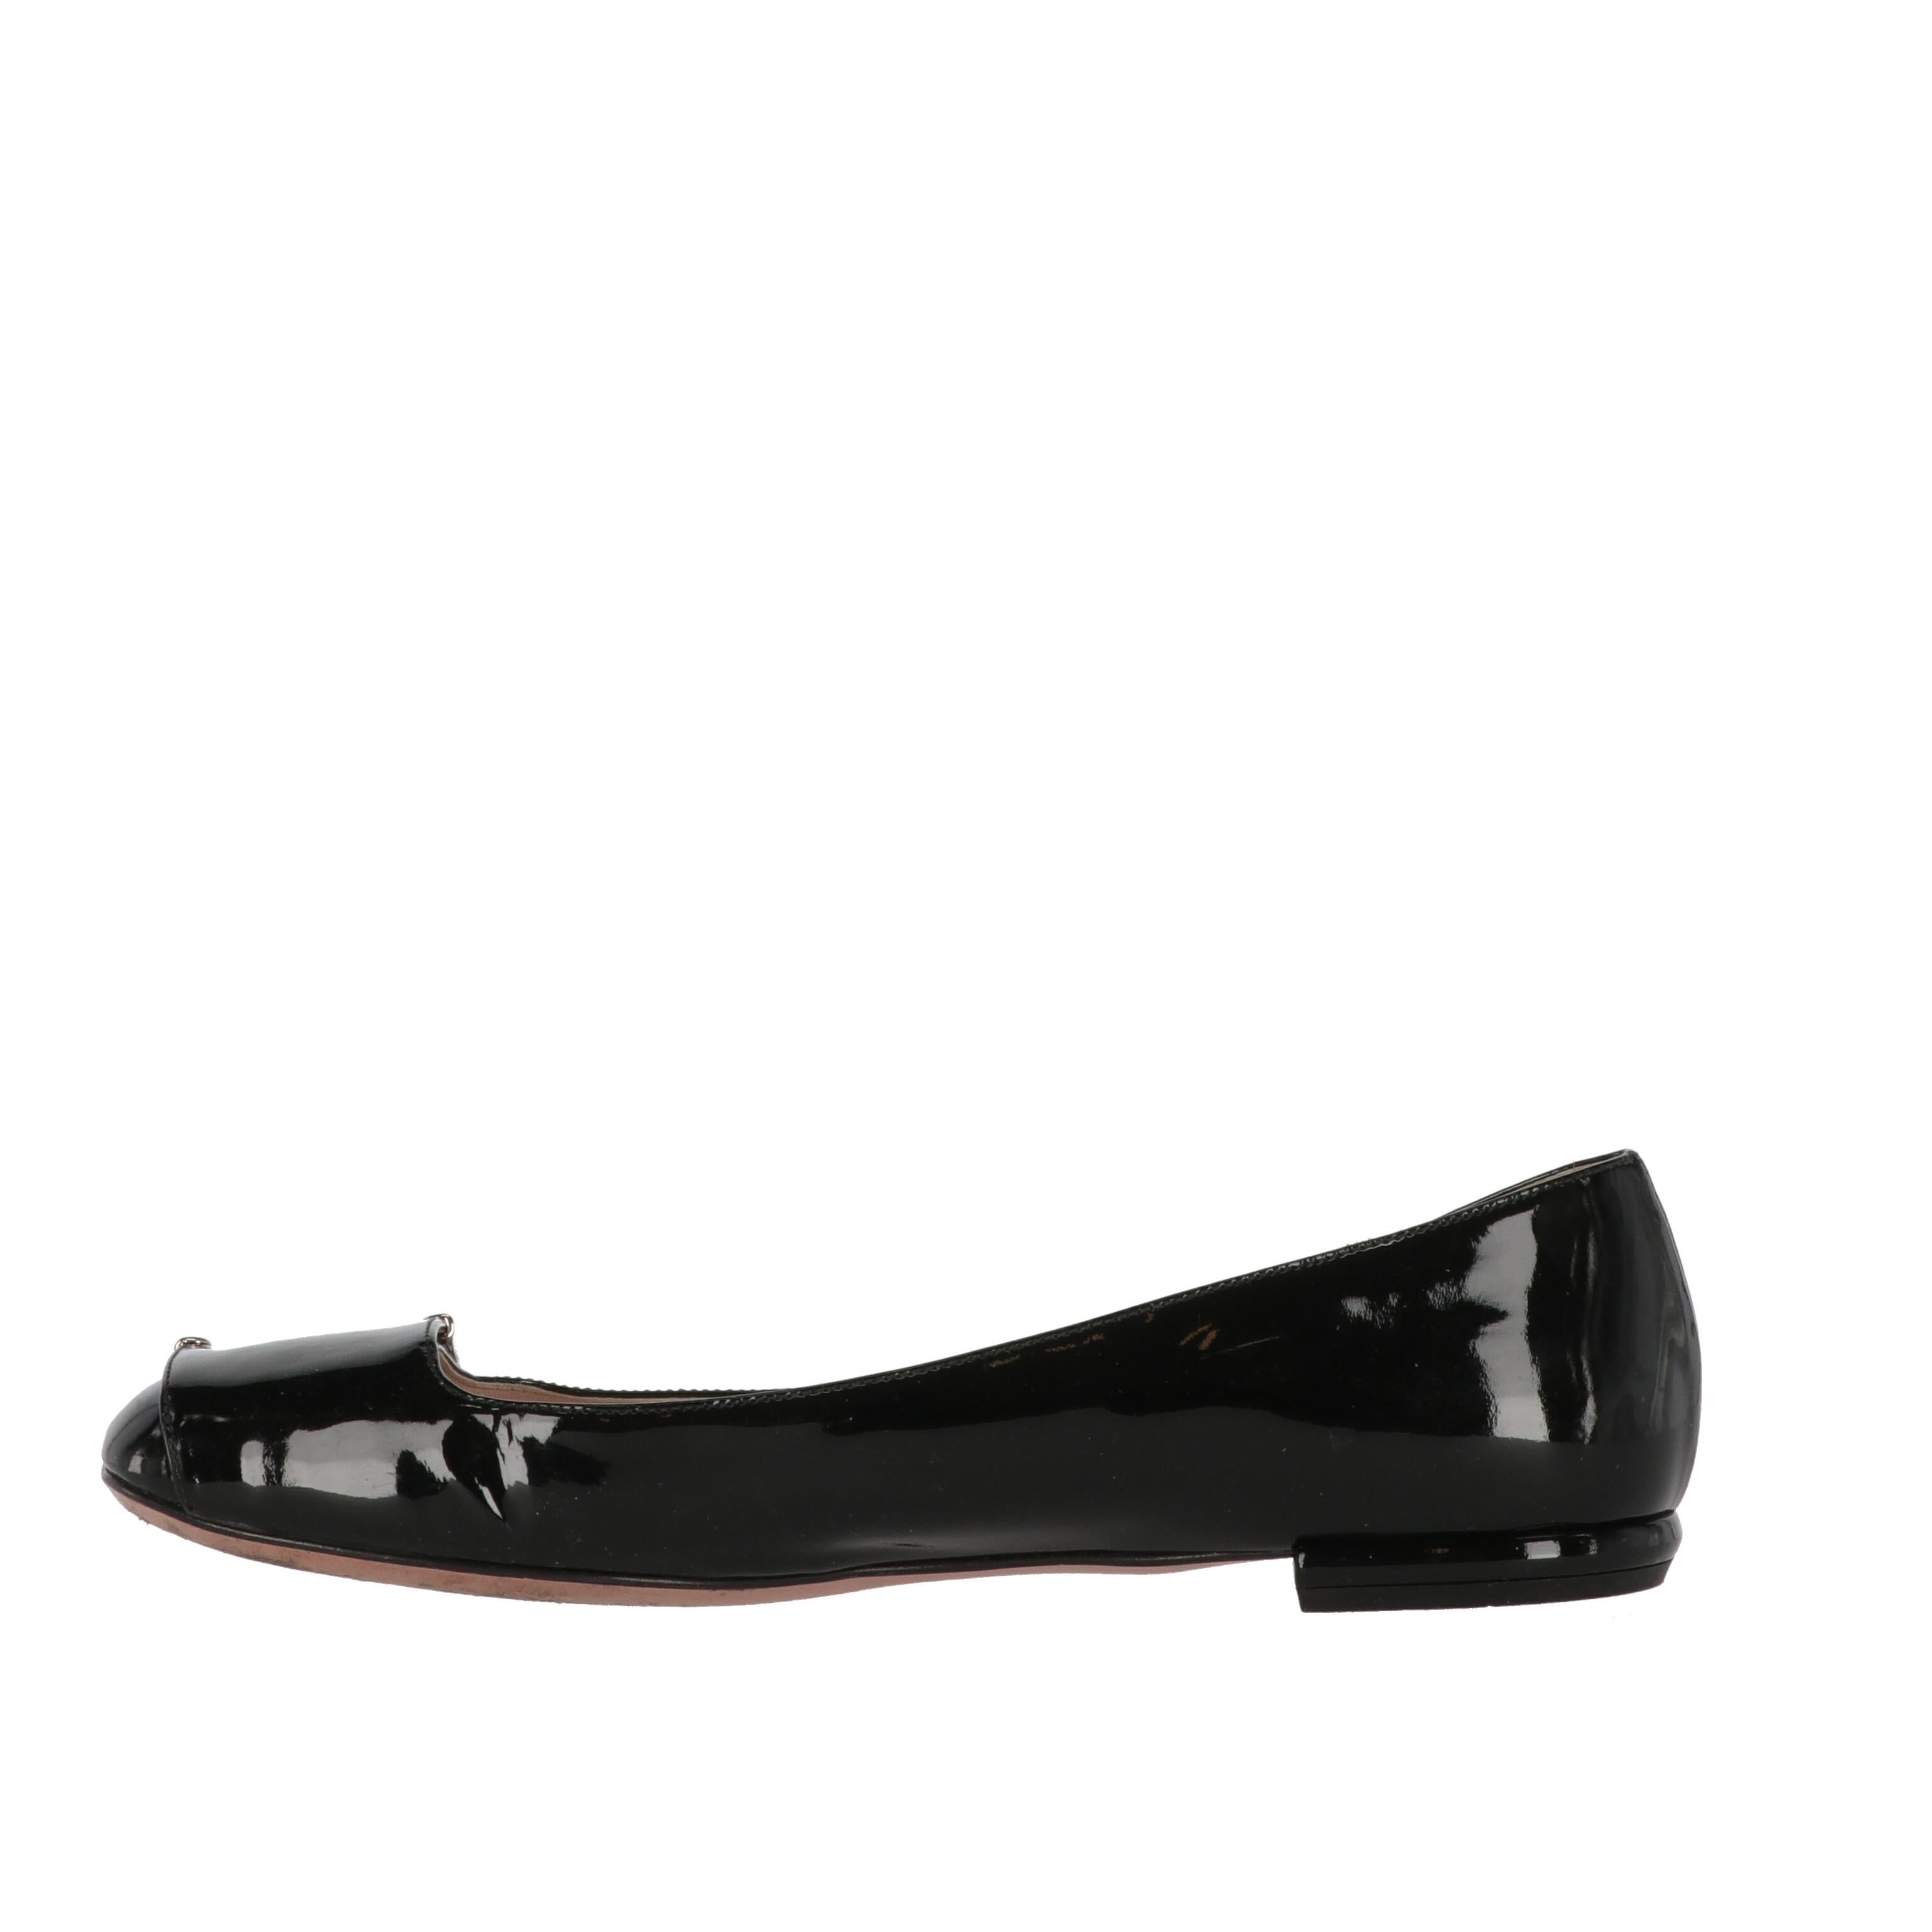 Perfect to add a touch of elegance to your everyday outfits, these Prada black patent leather ballet flats feature a round toe and fake strap with logoed silver-tone metal detail. 

They show light signs of wear and wrinkles on the leather, as shown